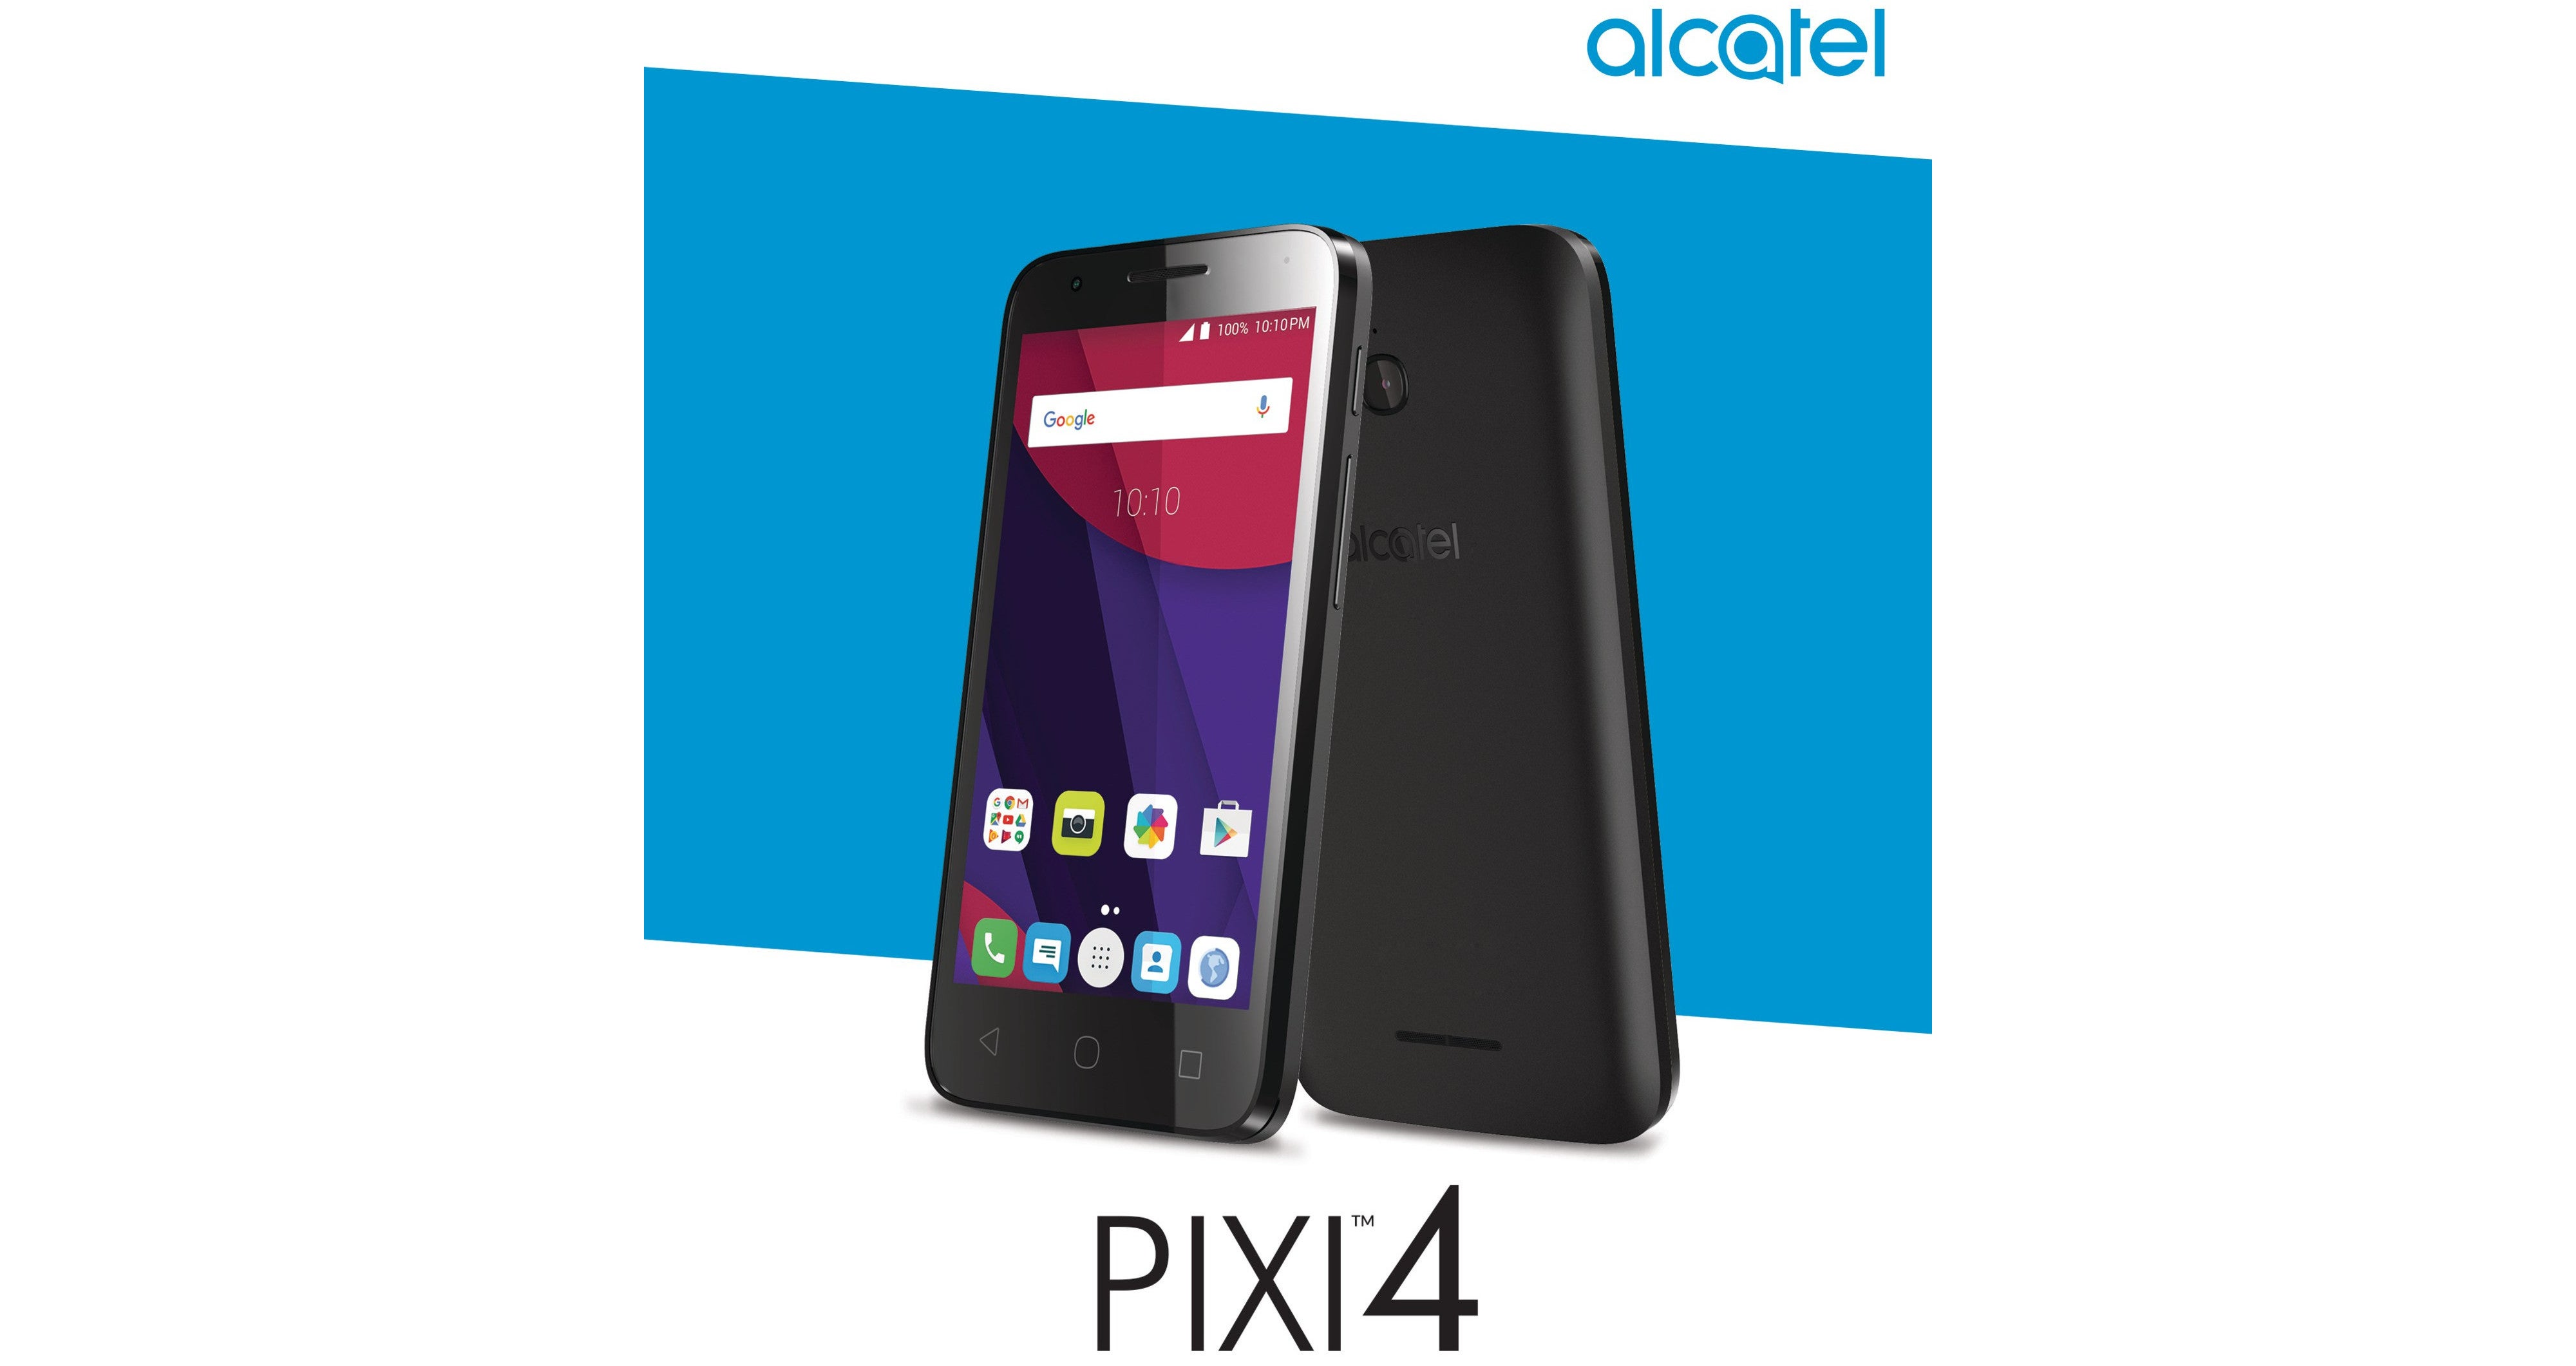 Affordable Alcatel PIXI 4 coming to Canada in October